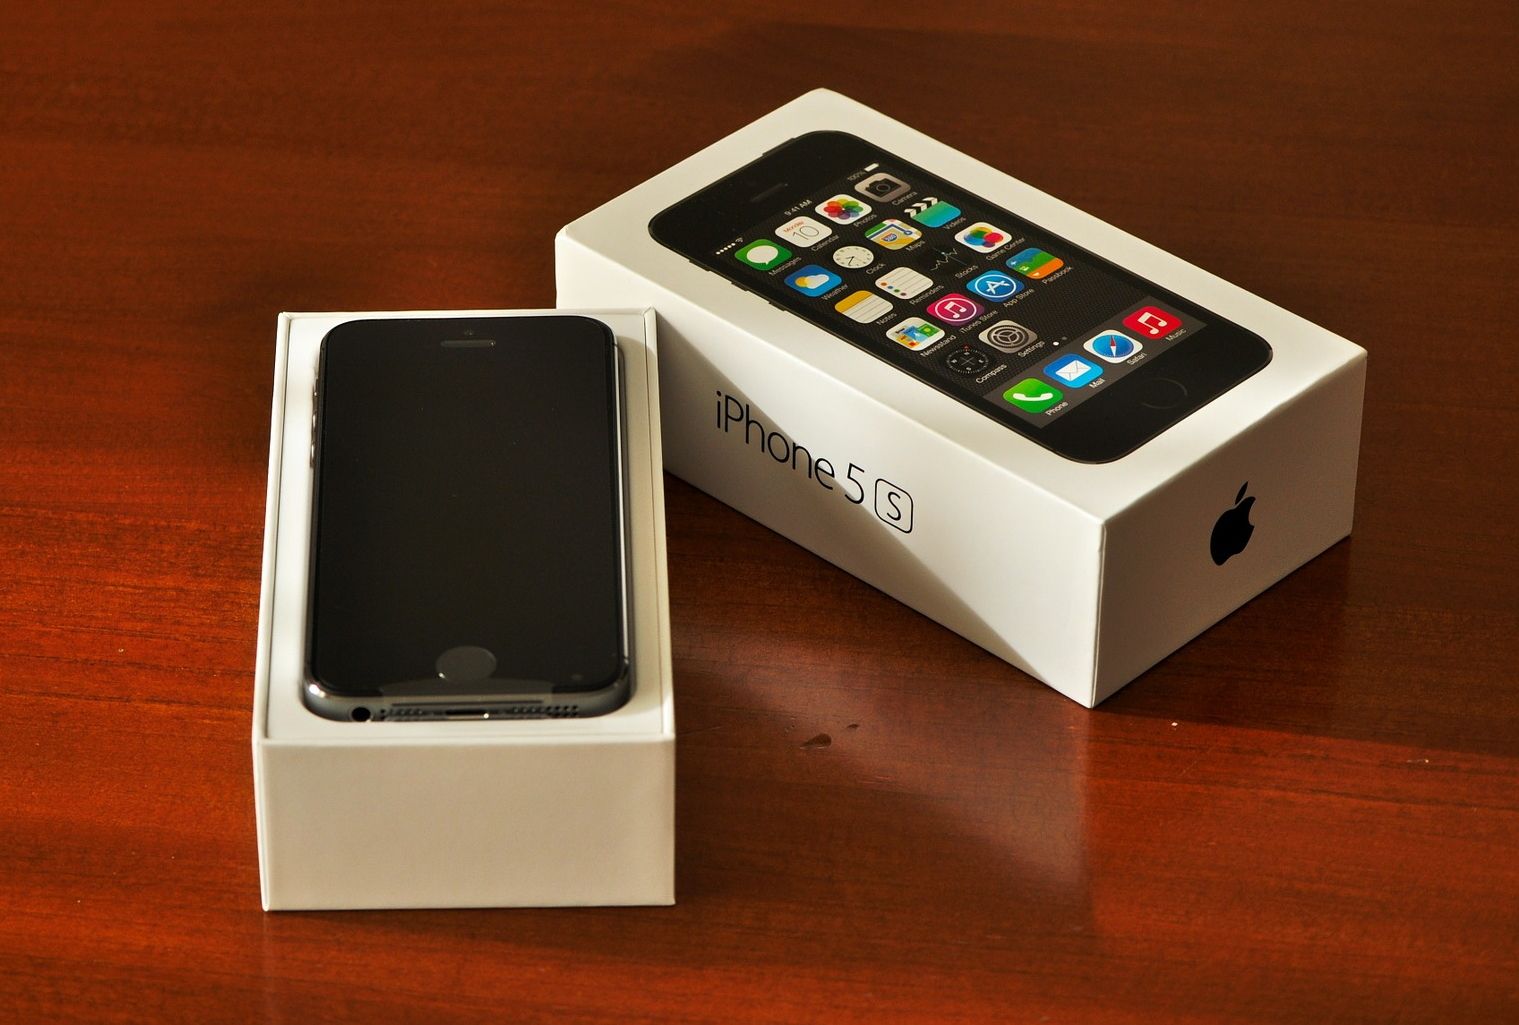 An iPhone 5s box. The model name is displayed on the side.